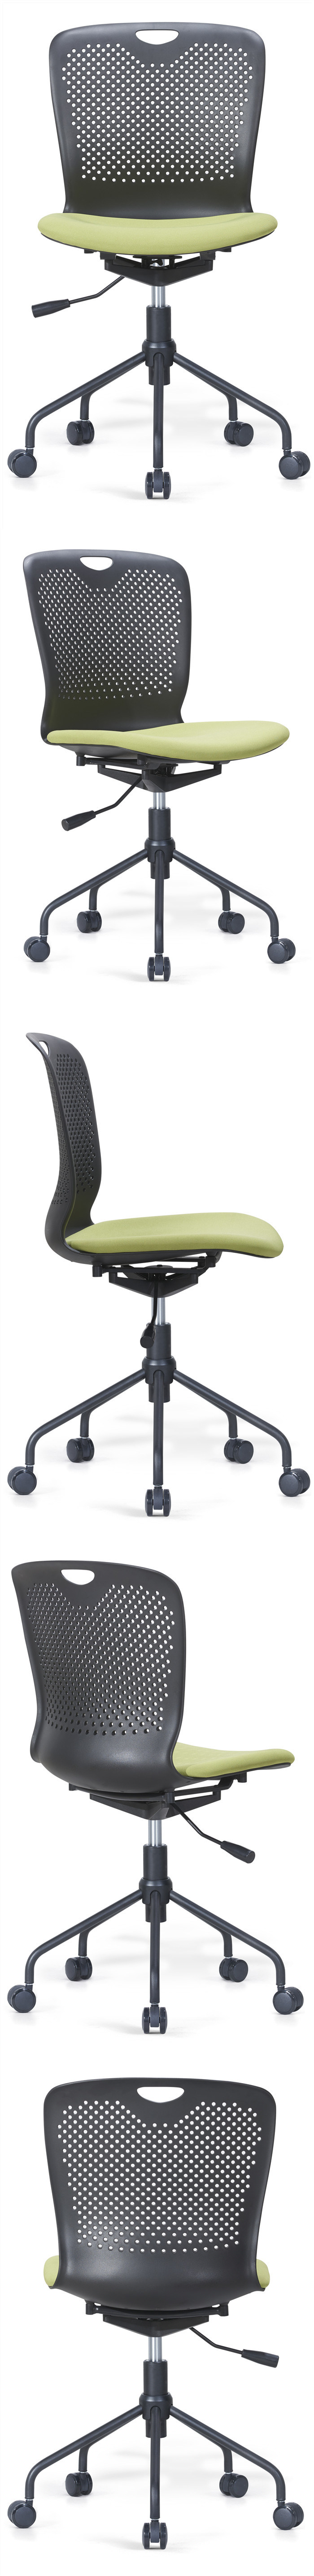 Office Leisure Chair Swivel Meeting Chair Student Table Chair